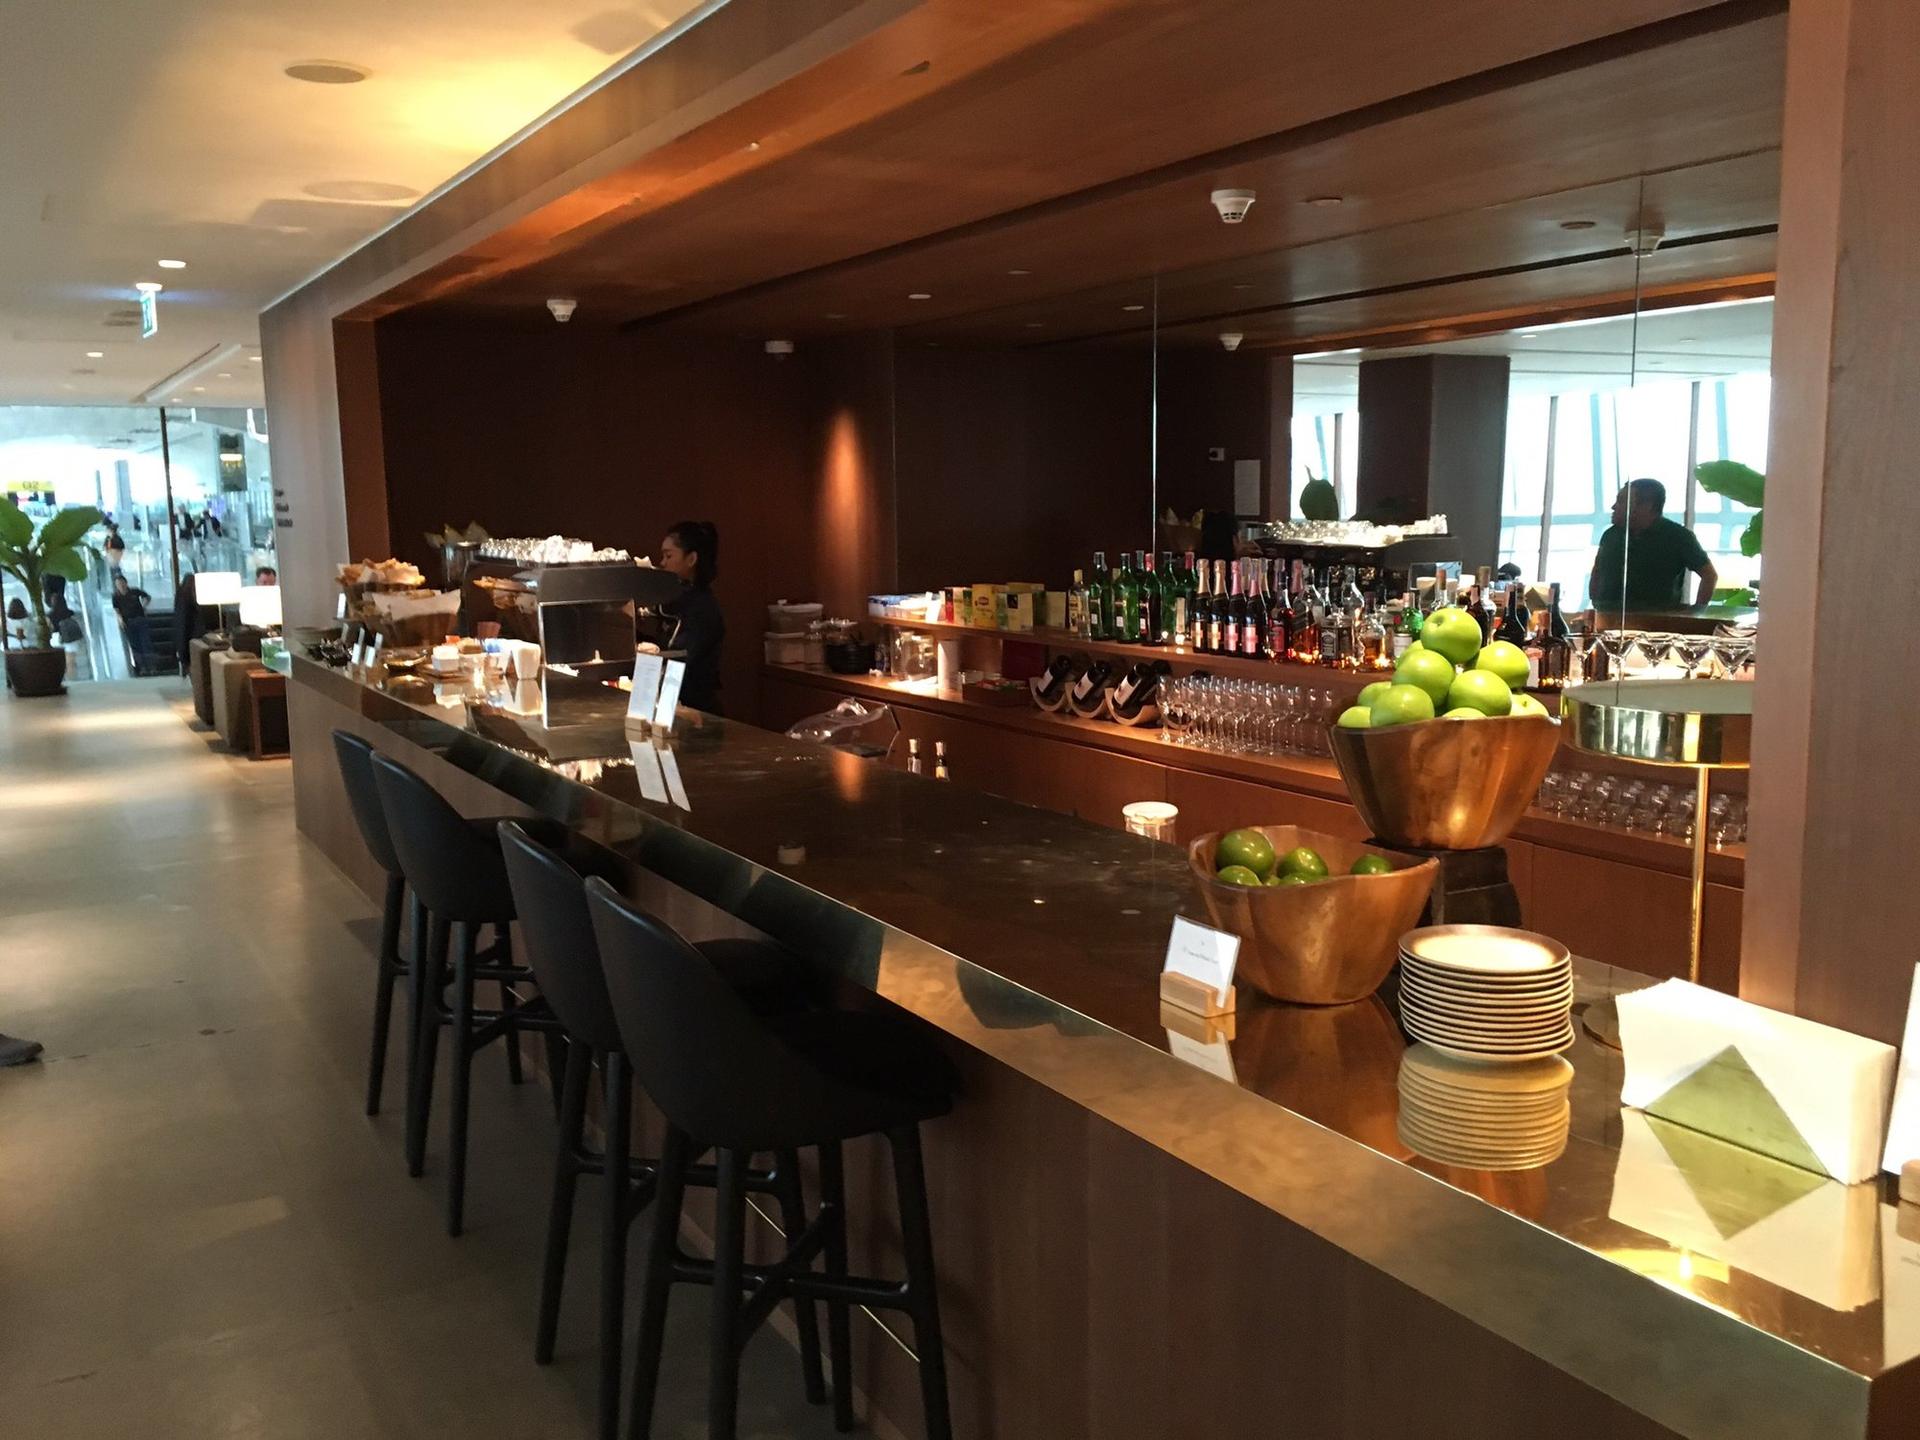 Cathay Pacific First and Business Class Lounge image 61 of 69